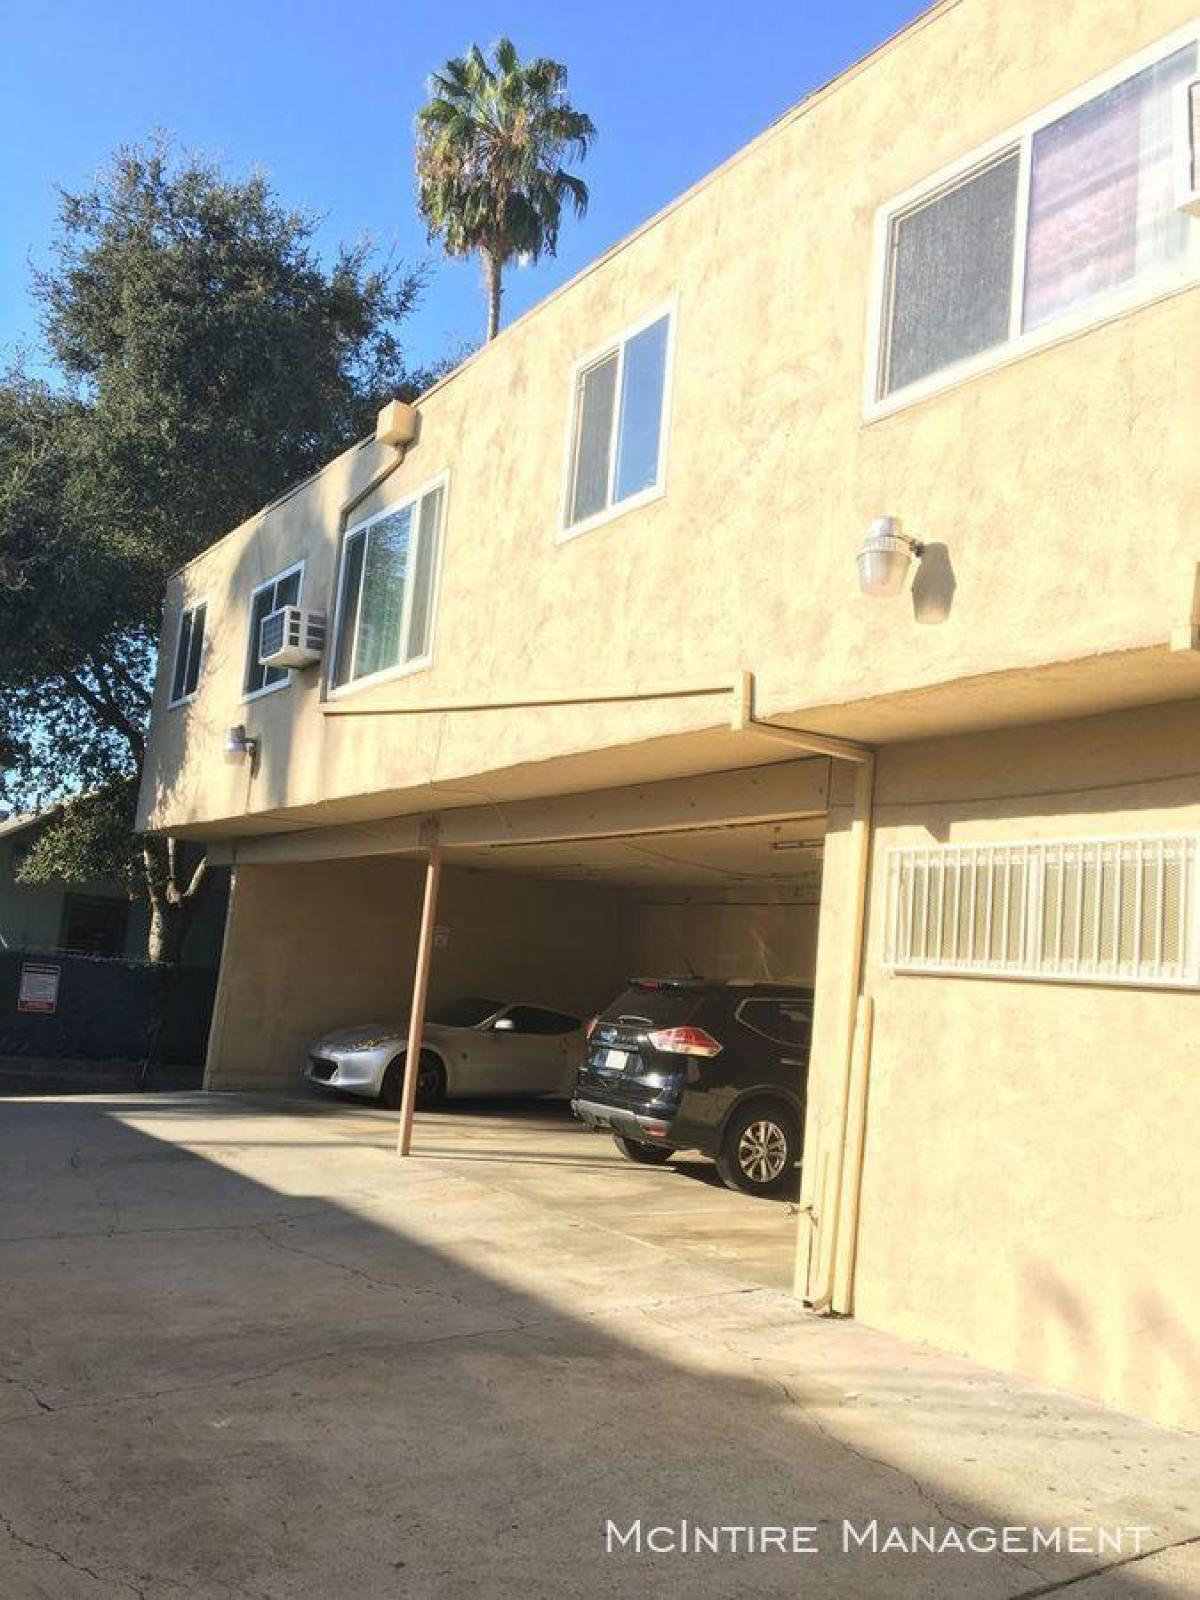 Picture of Apartment For Rent in Pasadena, California, United States